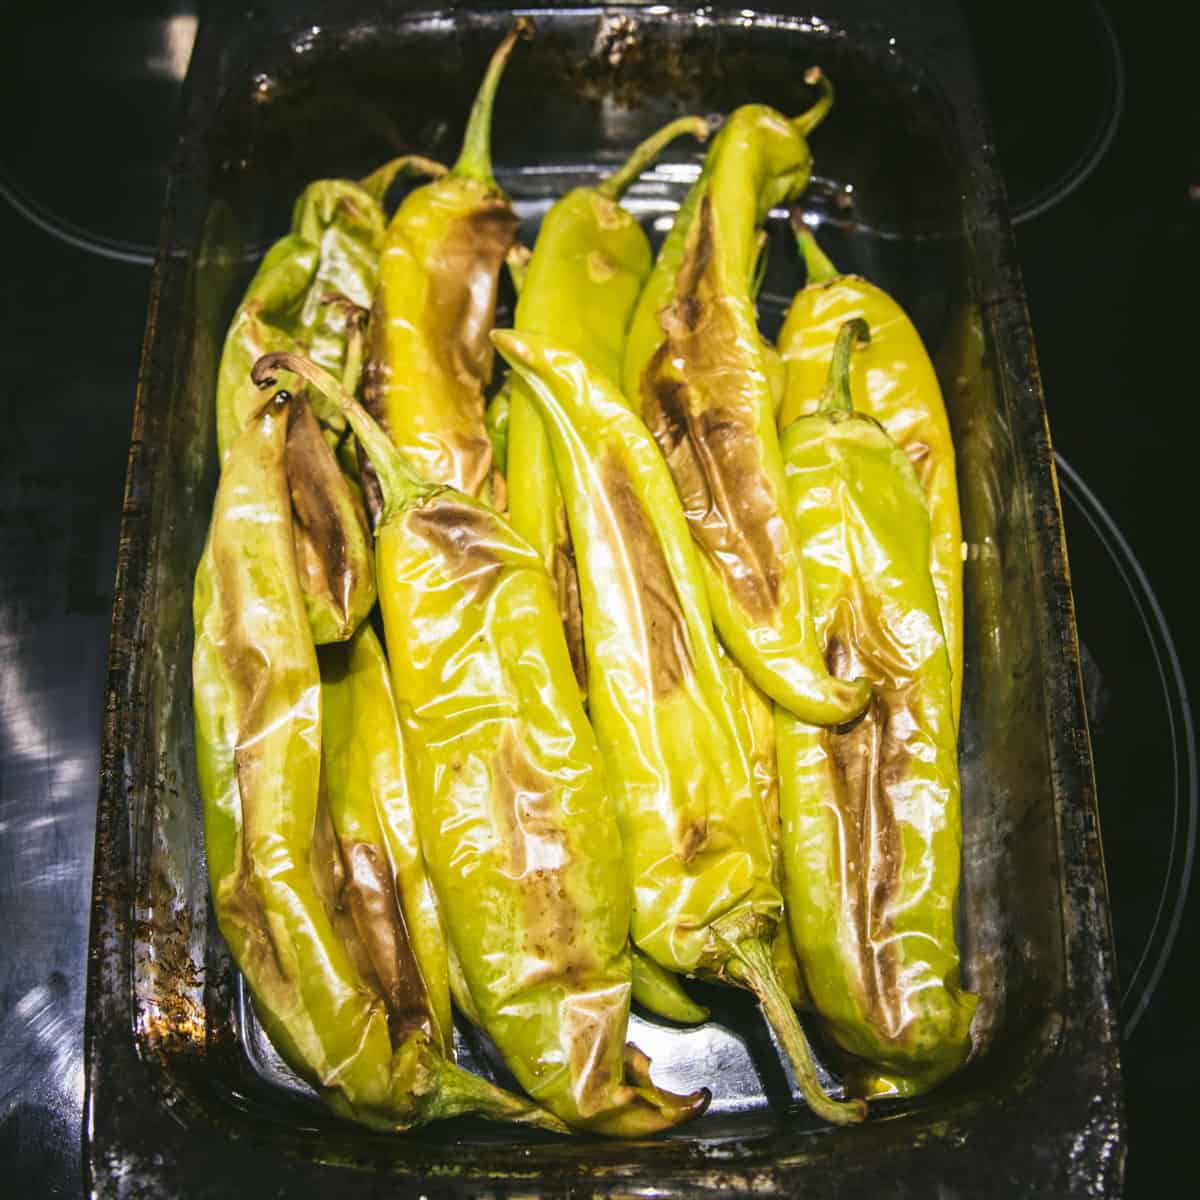 A pile of roasted hatch peppers with charred brown skin in a baking pan.